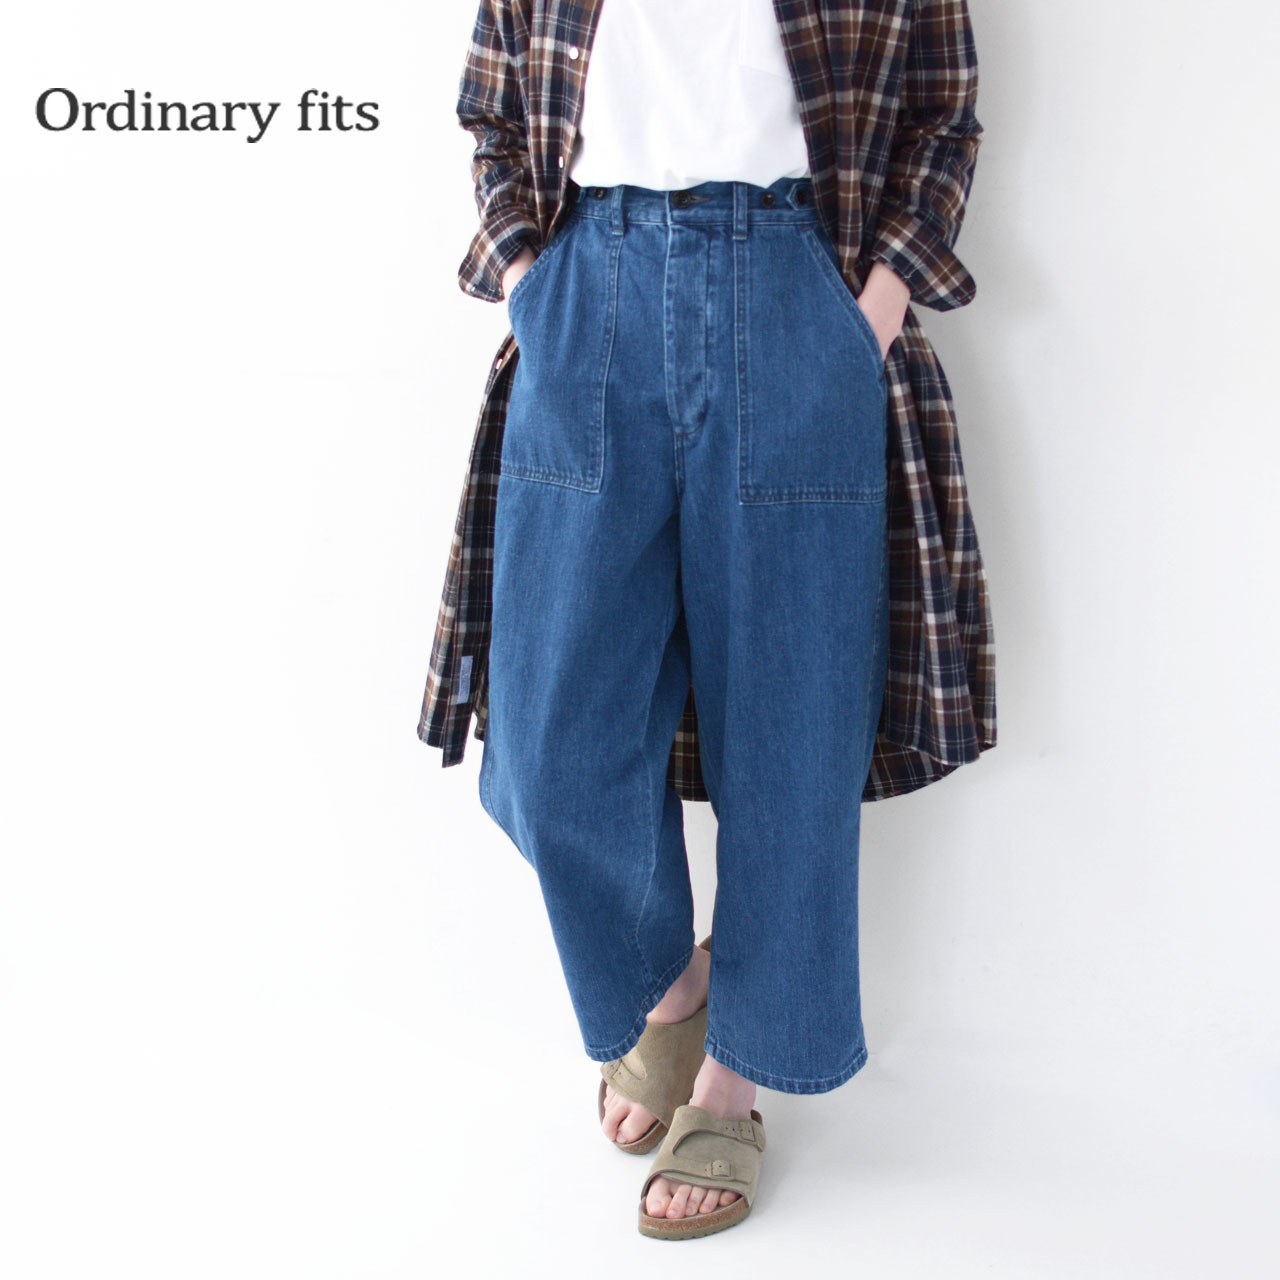 ordinary fits [オーディナリーフィッツ] JAMES PANTS used [OF-P045 